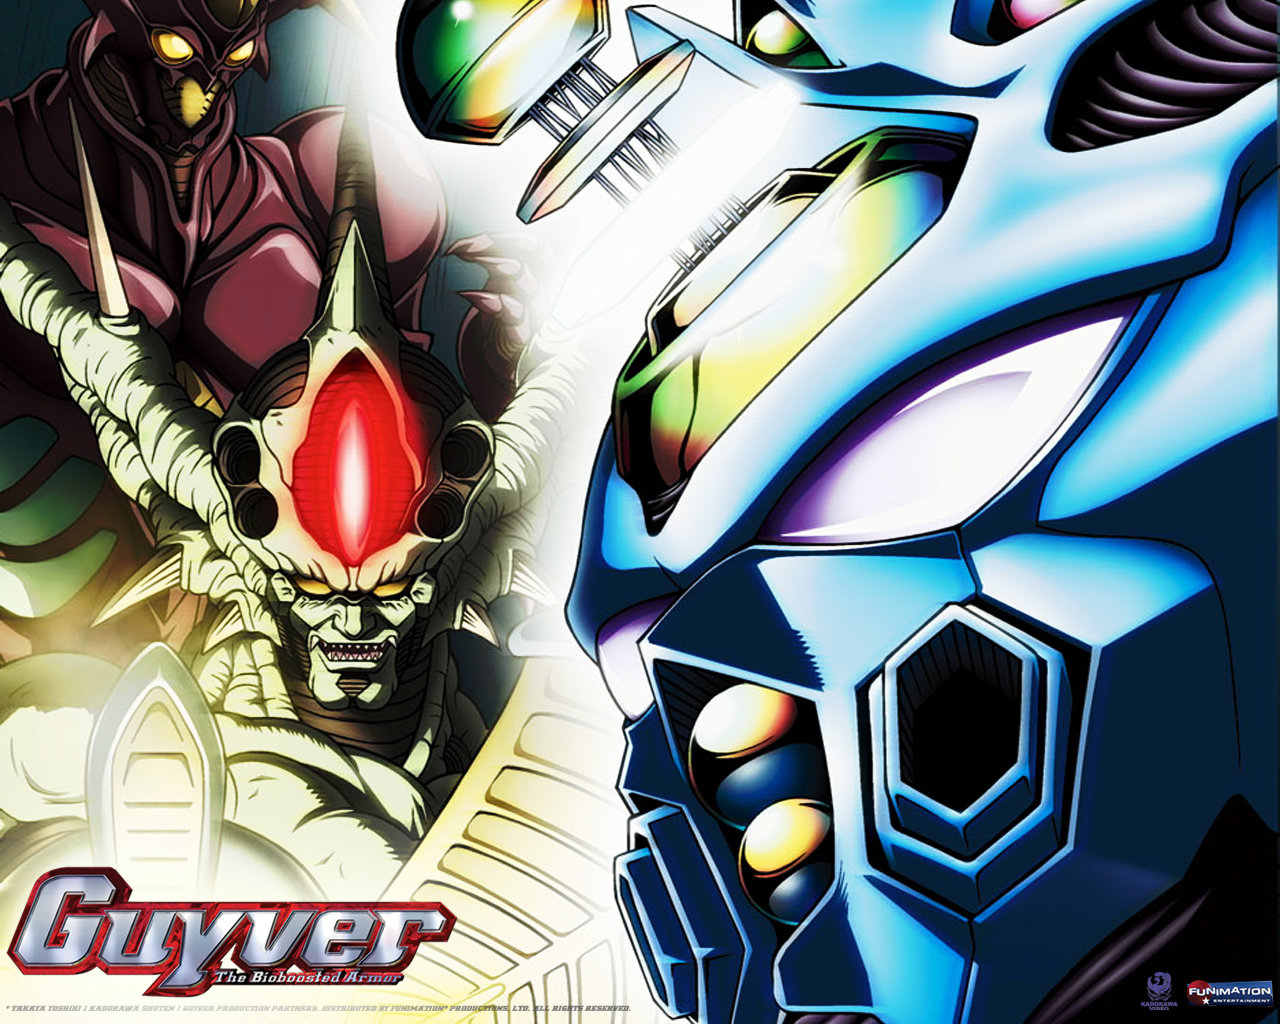 Best Guyver The Bioboosted Armor wallpaper ID:281941 for High Resolution hd 1280x1024 computer